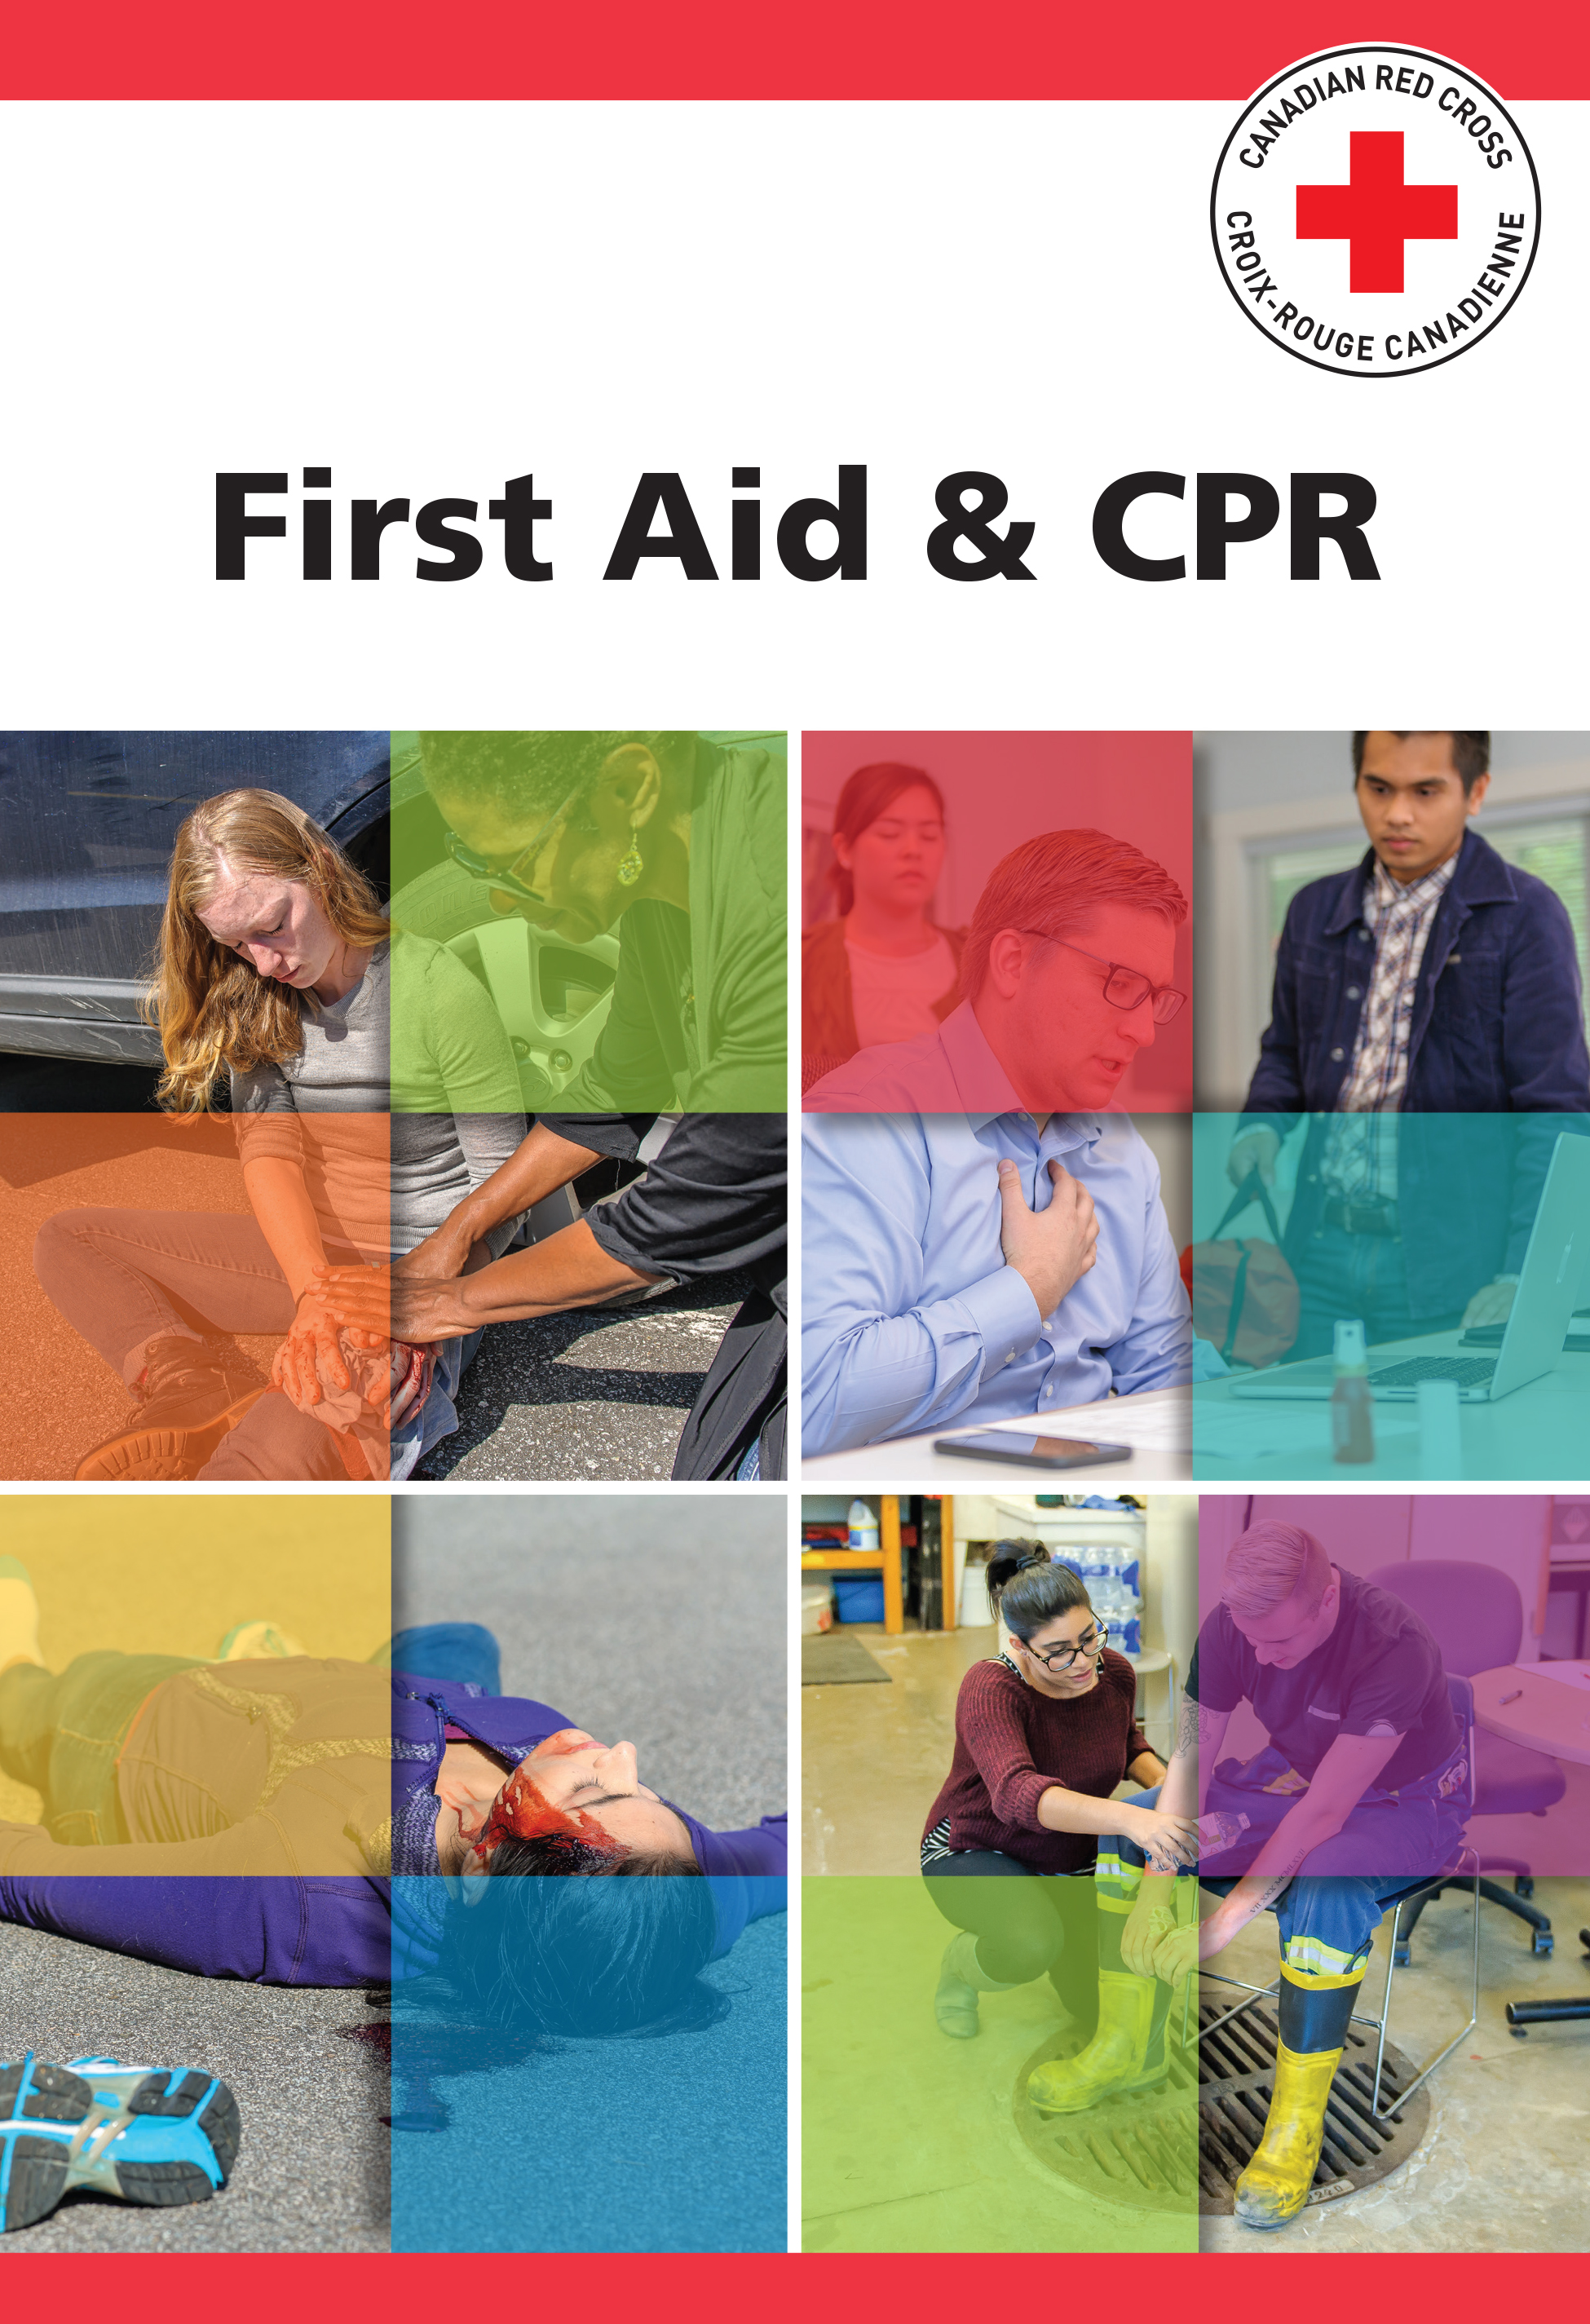 First Aid Course Materials for Marine Basic First Aid and CPR Level C (Blended) in Victoria-TILLICUM